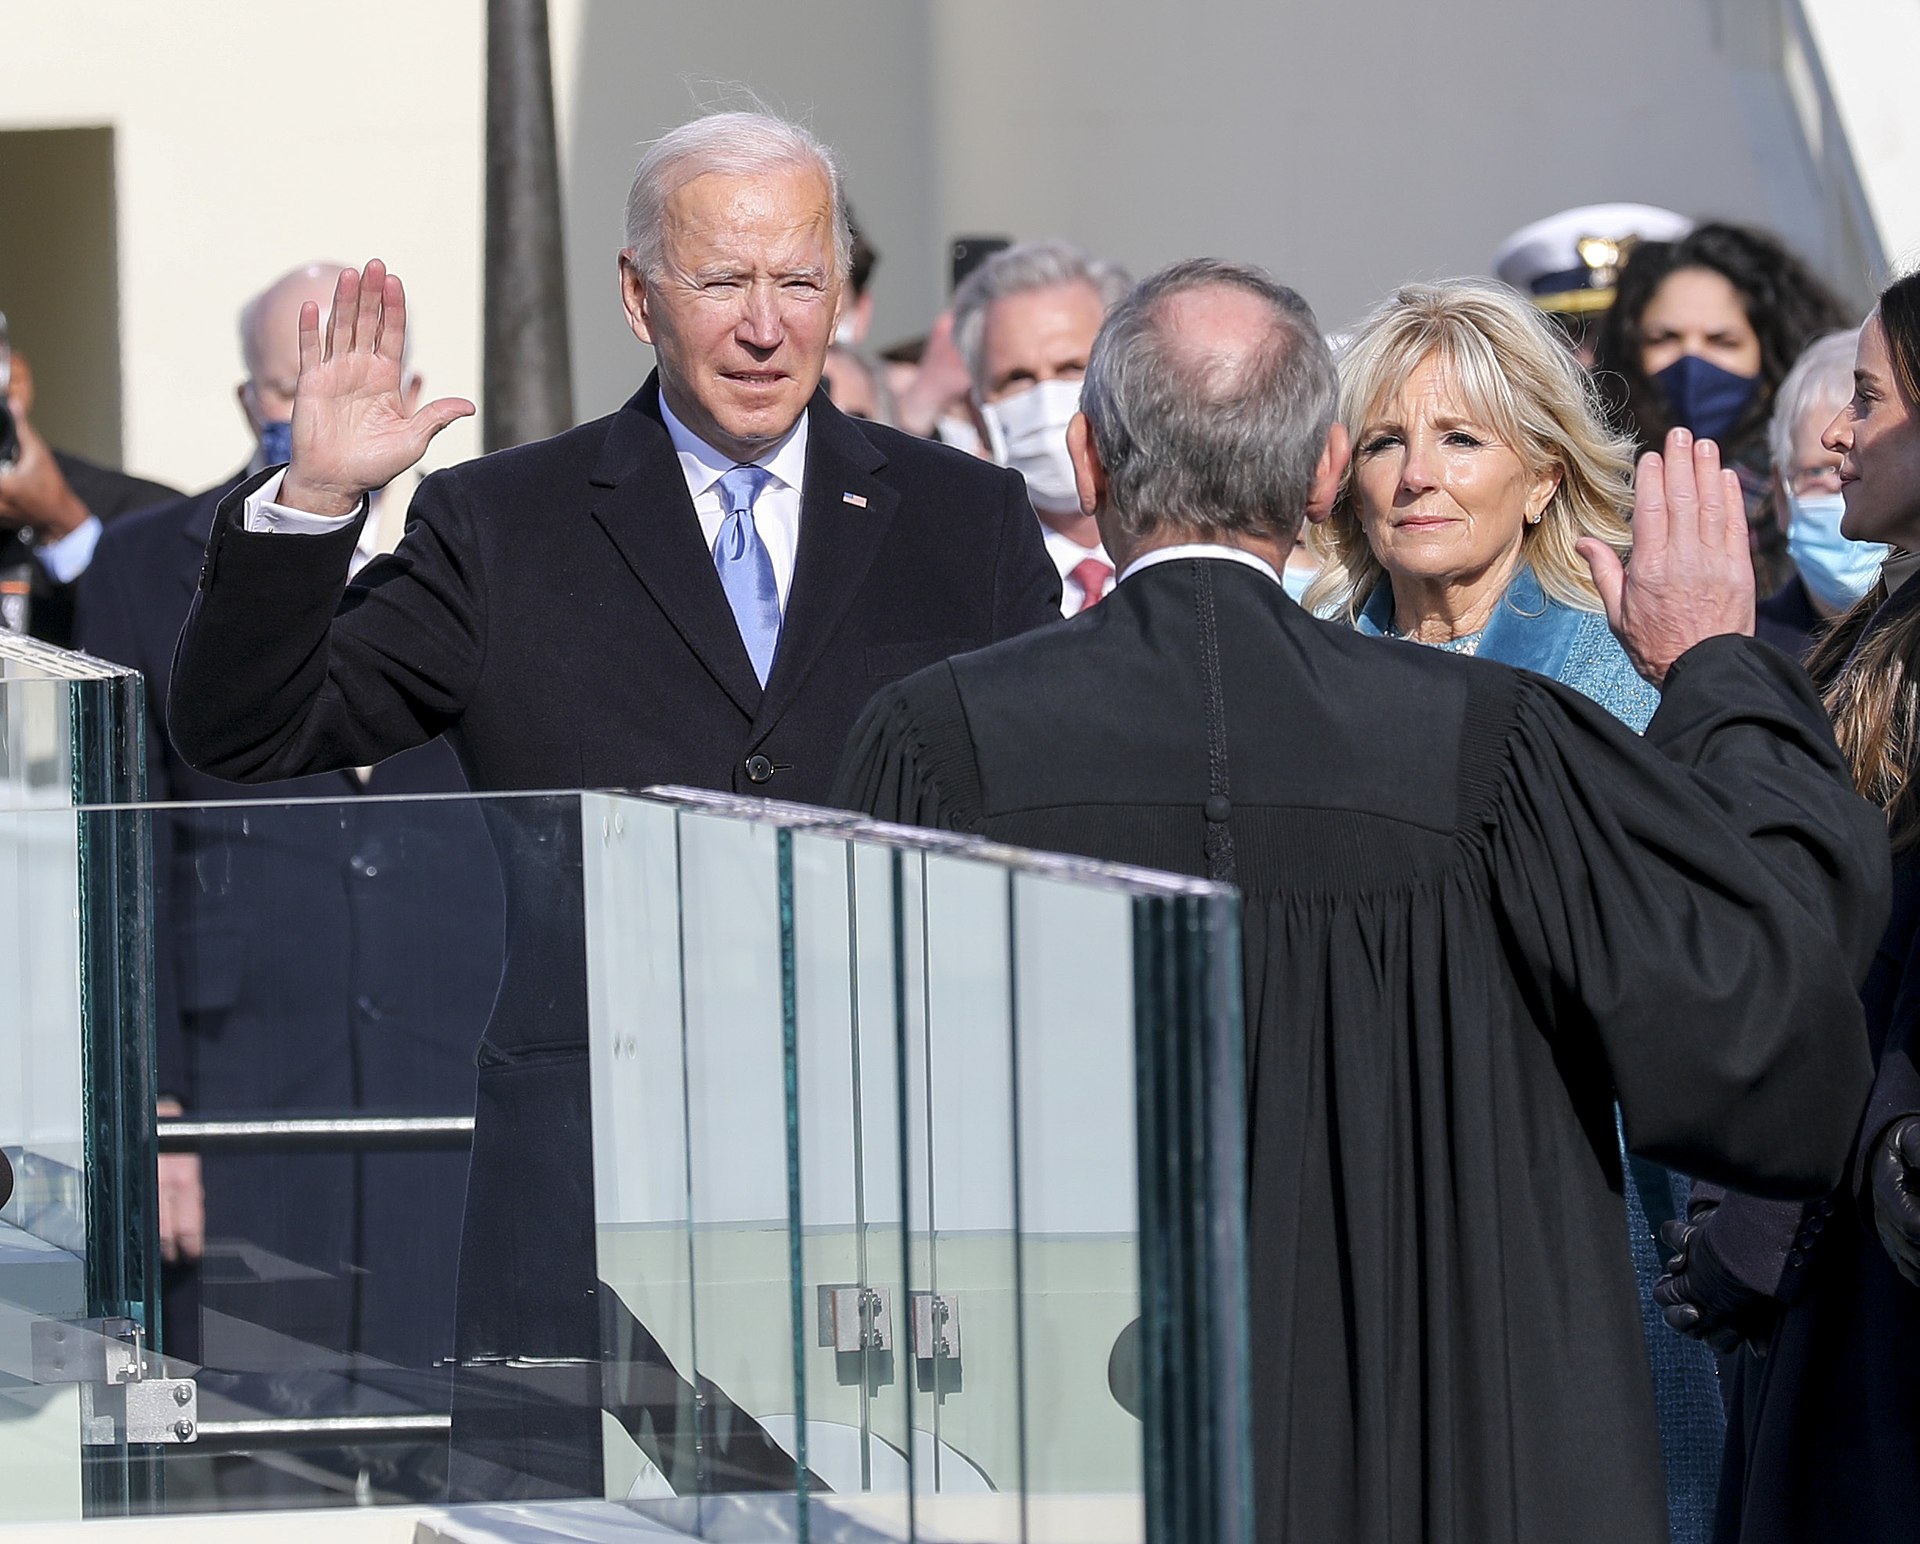 President-elect Joseph R. Biden Jr. takes the presidential oath of office at the U.S. Capitol, Washington, D.C., Jan. 20, 2021. Once the oath was completed, Biden became the 46th President of the United States of America. (DoD photo by U.S. Army Sgt. Charlotte Carulli)